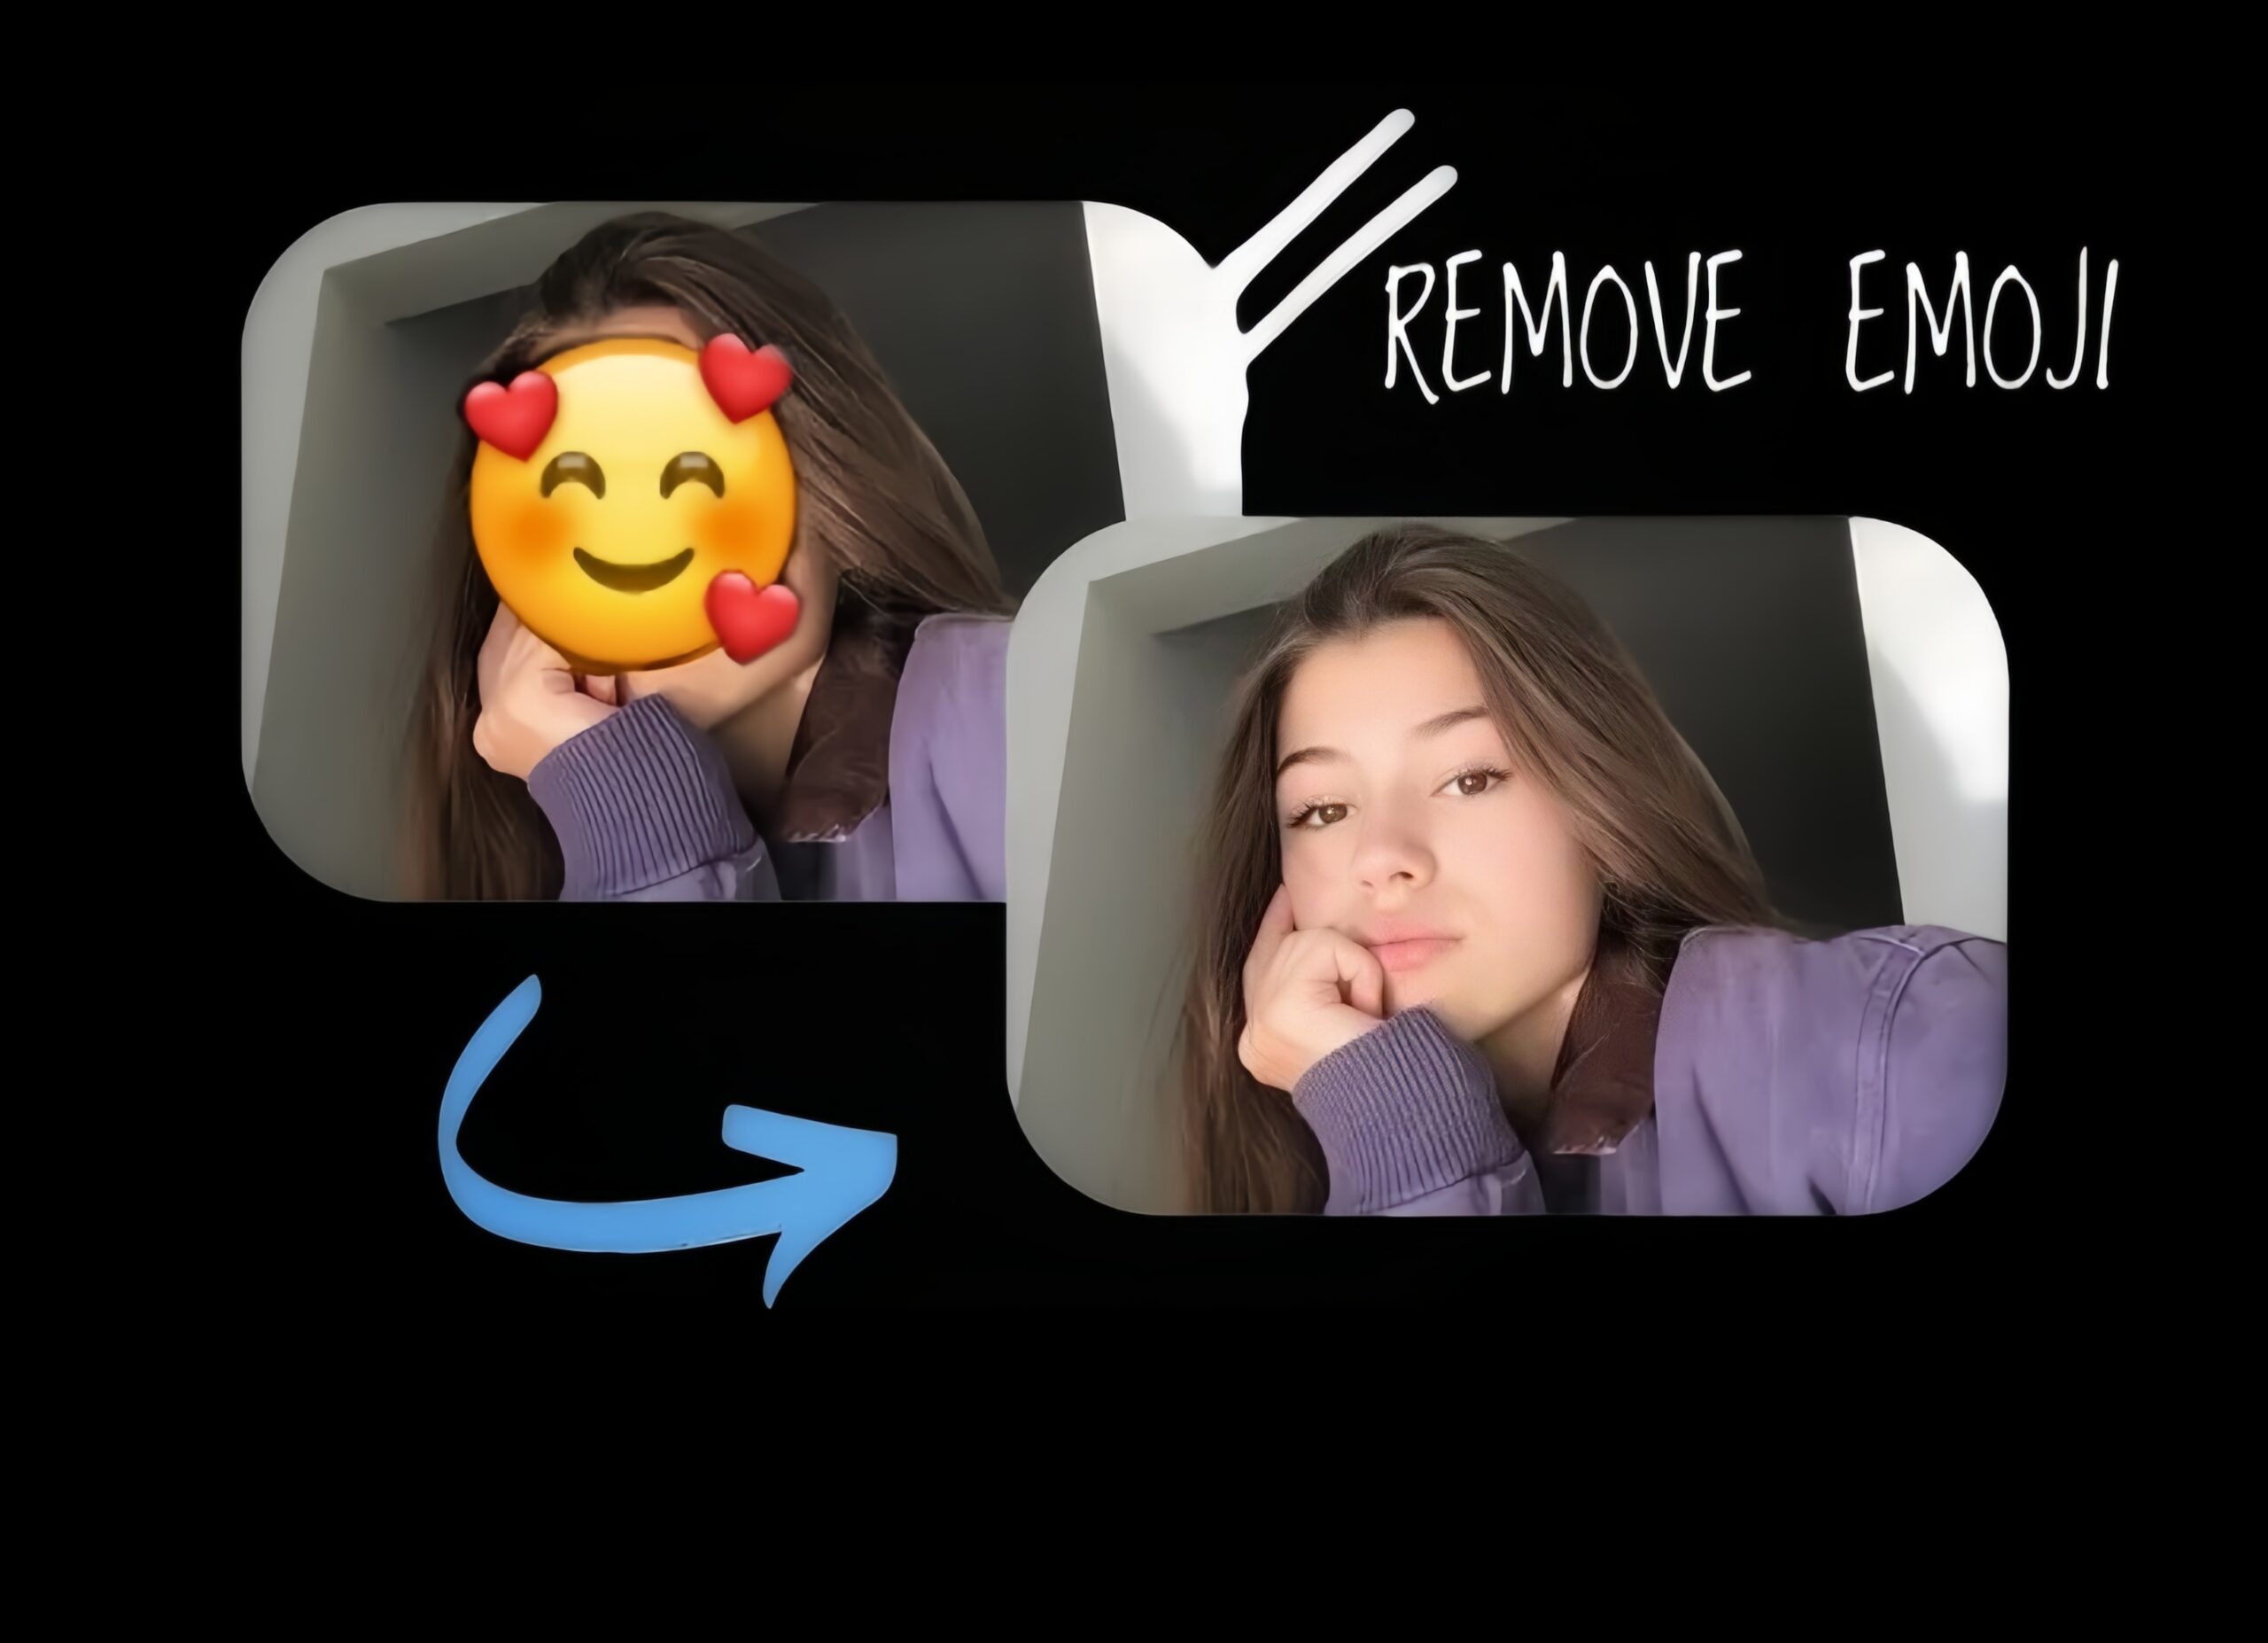 MAKE MONEY EDITING PICTURES